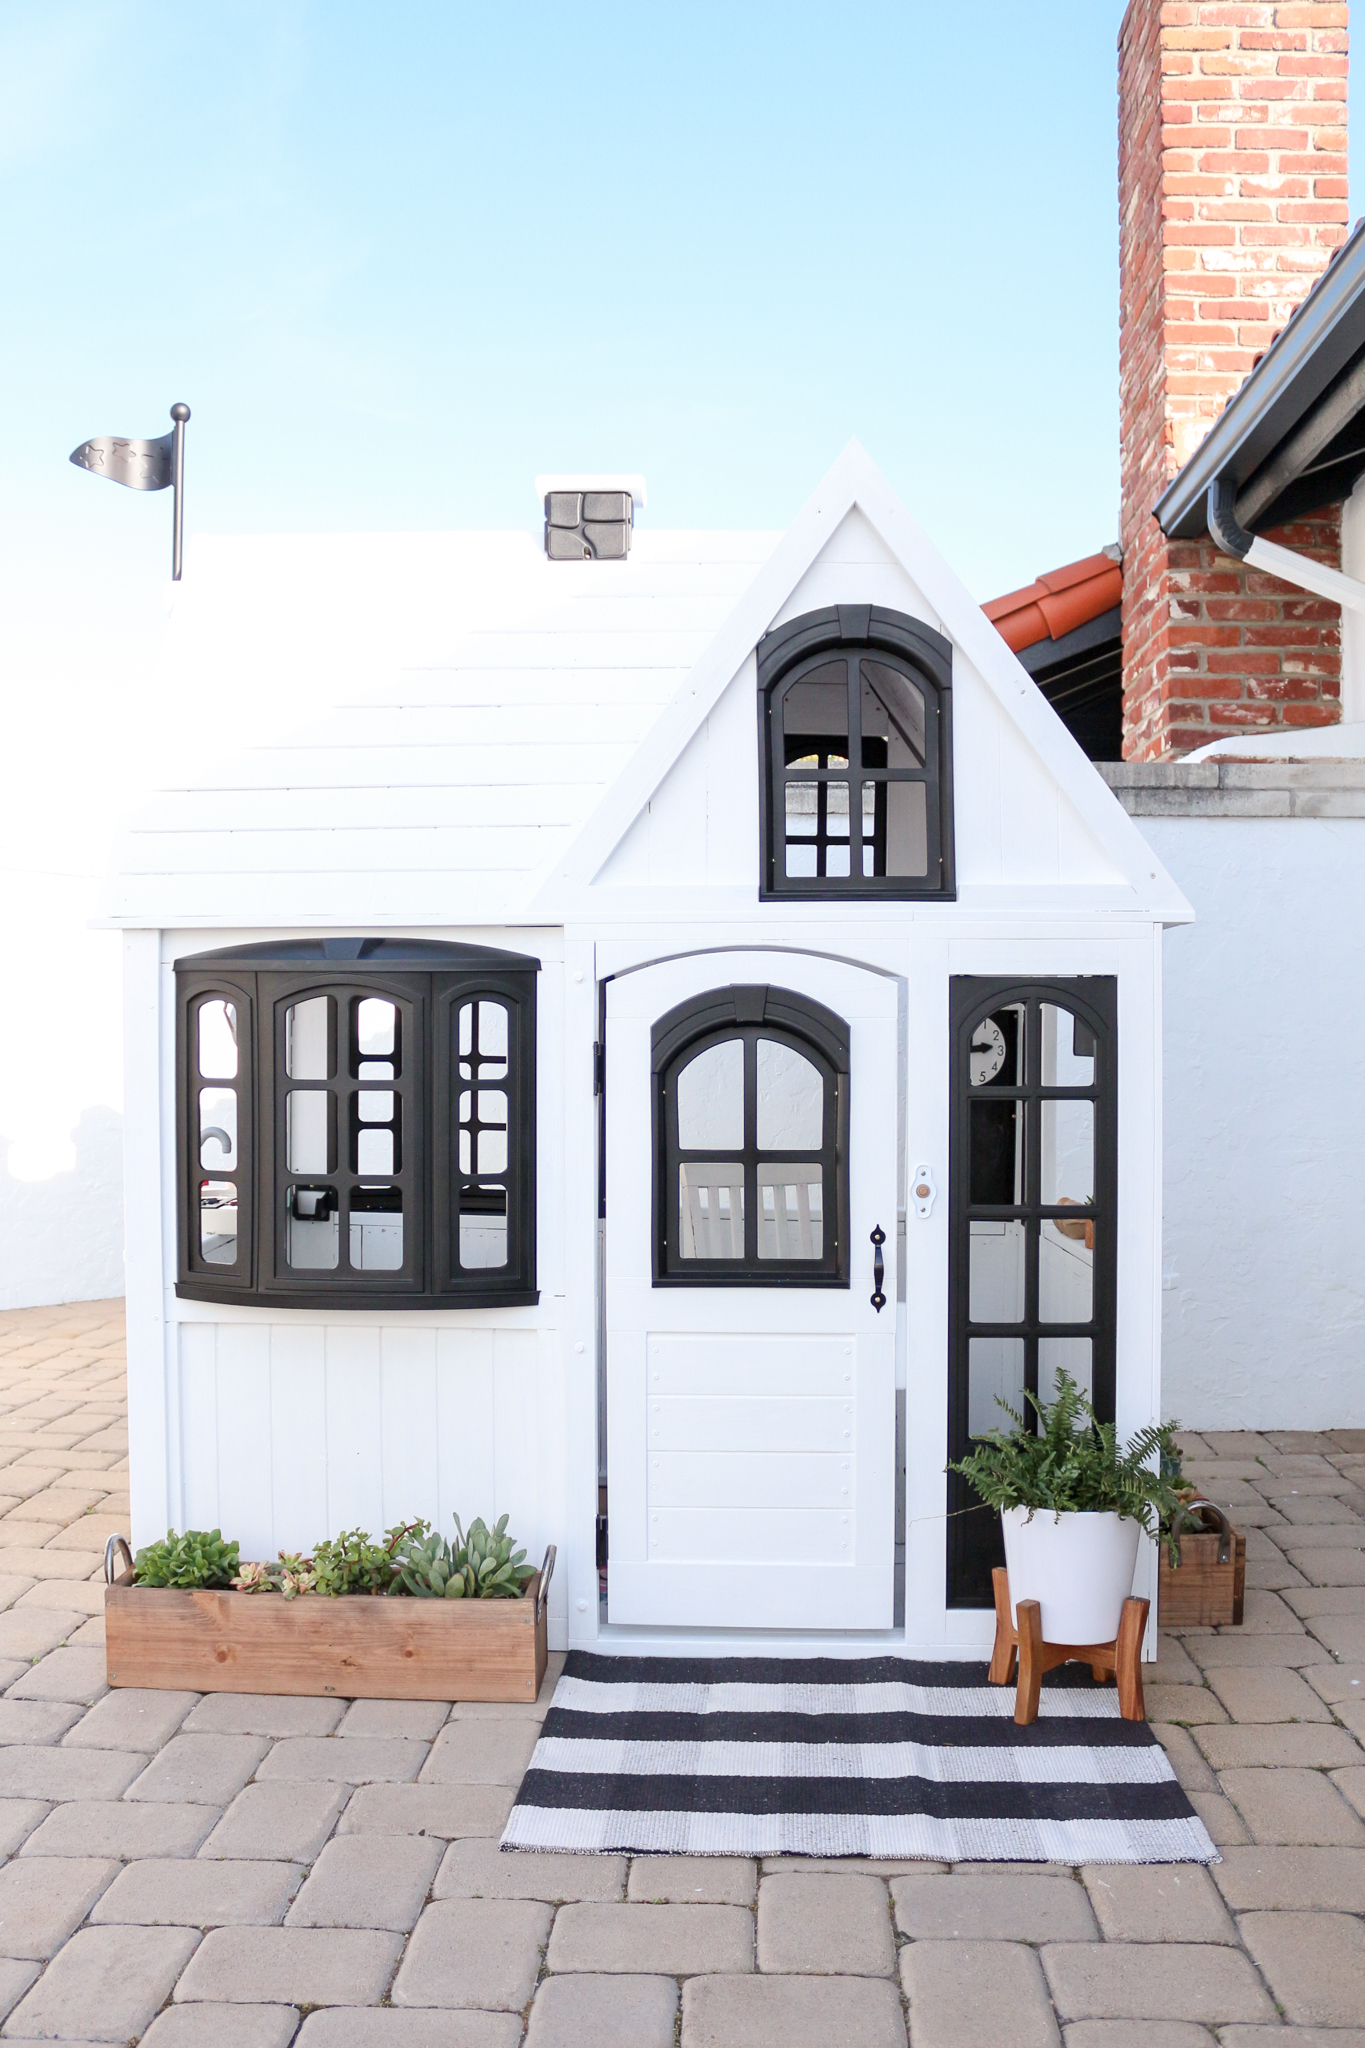 white wooden playhouse